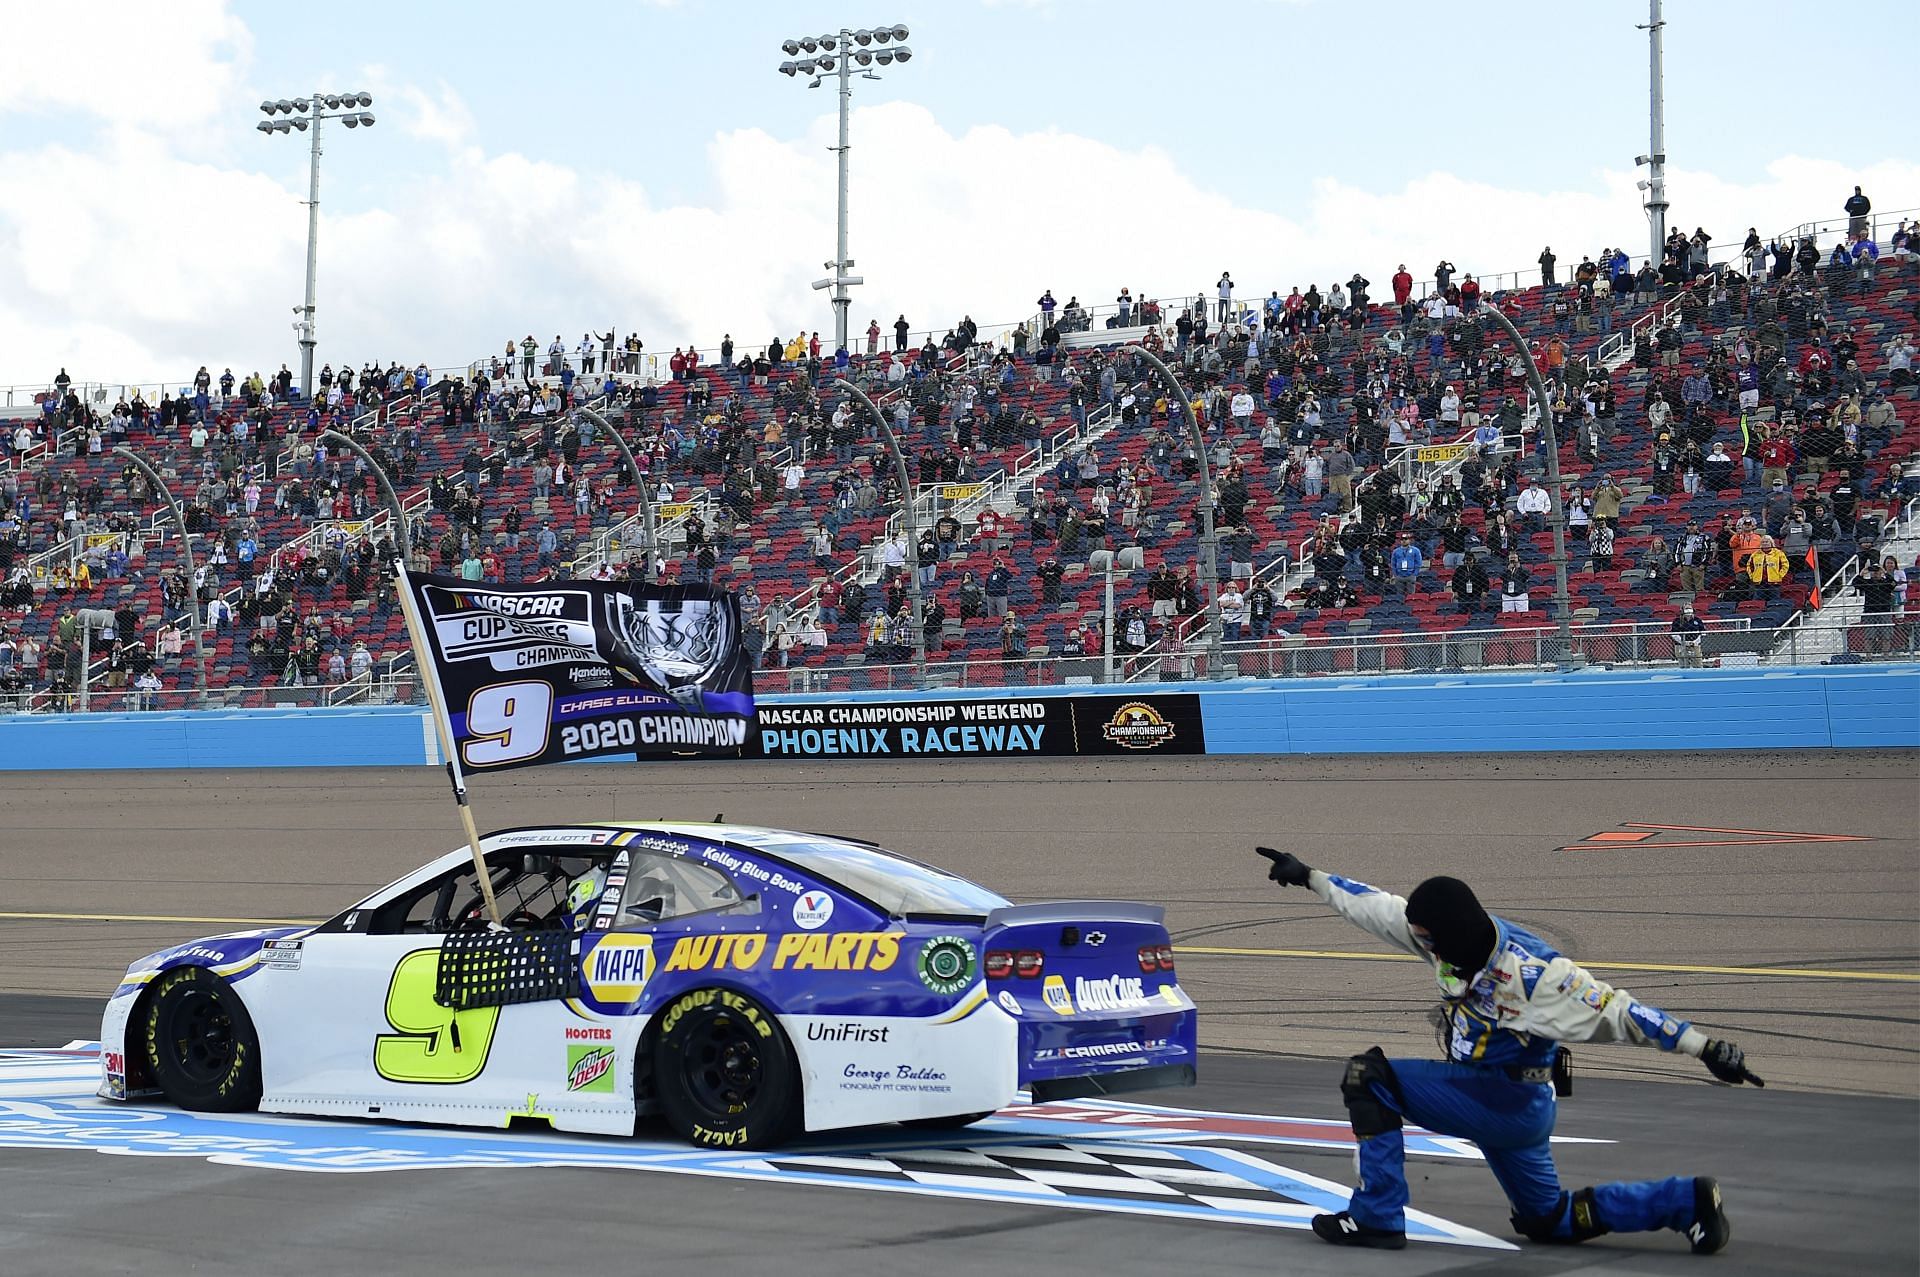 Chase Elliott and a pit crew member celebrate after winning the 2020 NASCAR Cup Series Season Finale 500 and the 2020 NASCAR Cup Series Championship at Phoenix Raceway in Avondale, Arizona. (Photo by Jared C. Tilton/Getty Images)